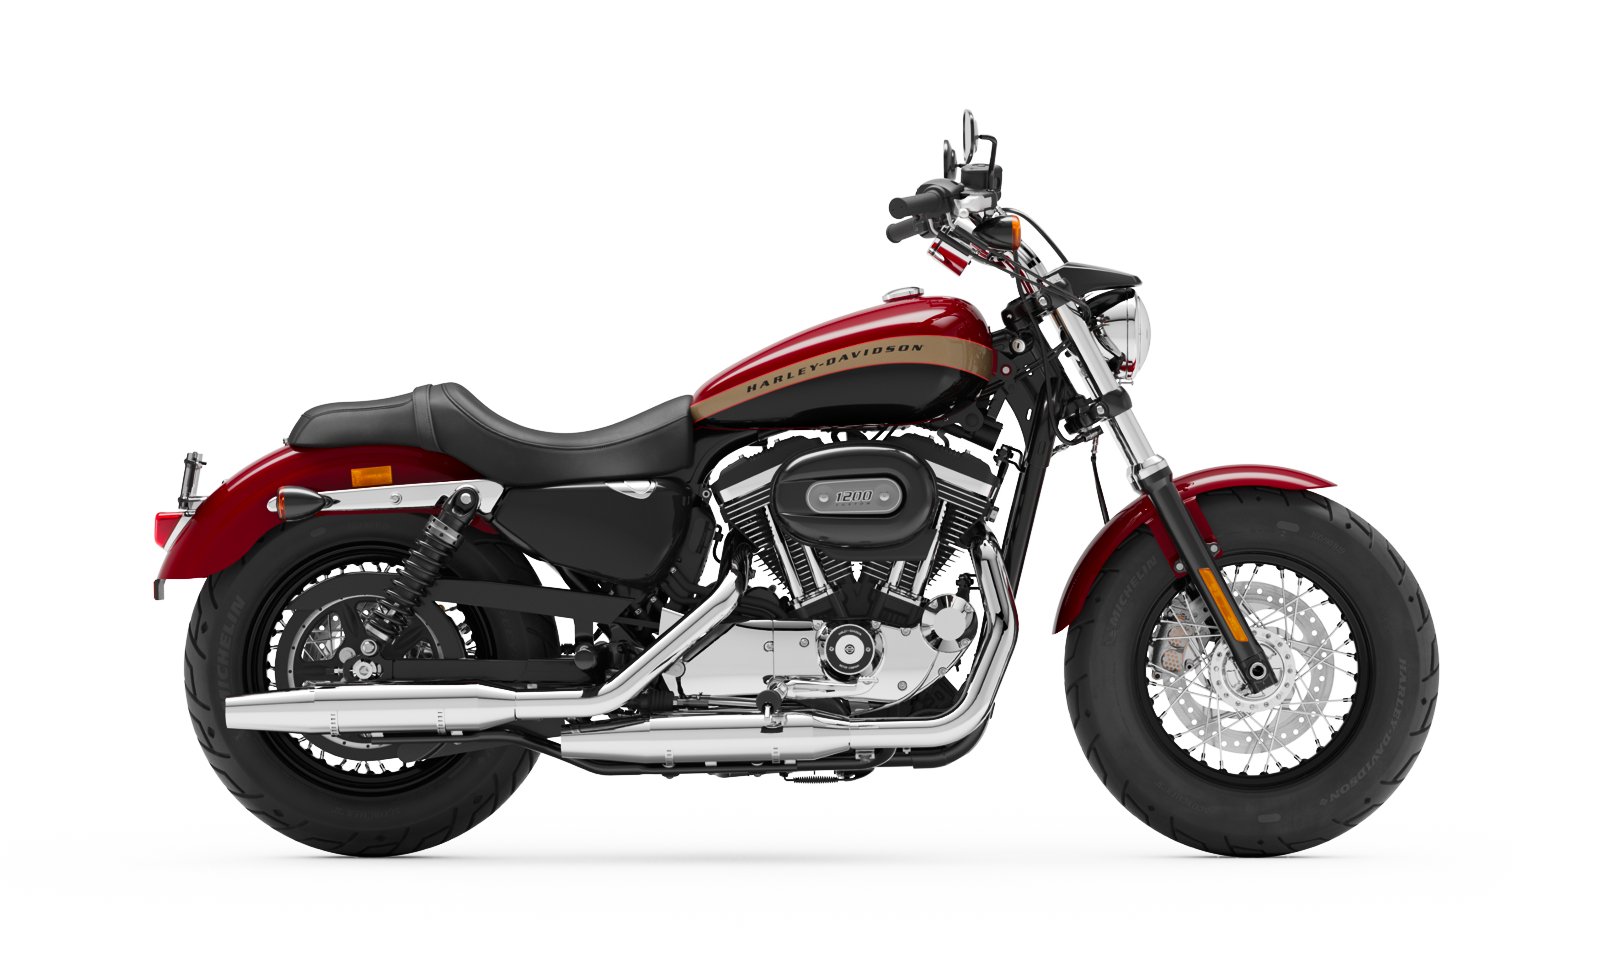 2019 Harley Davidson Motorcycles Price List In India